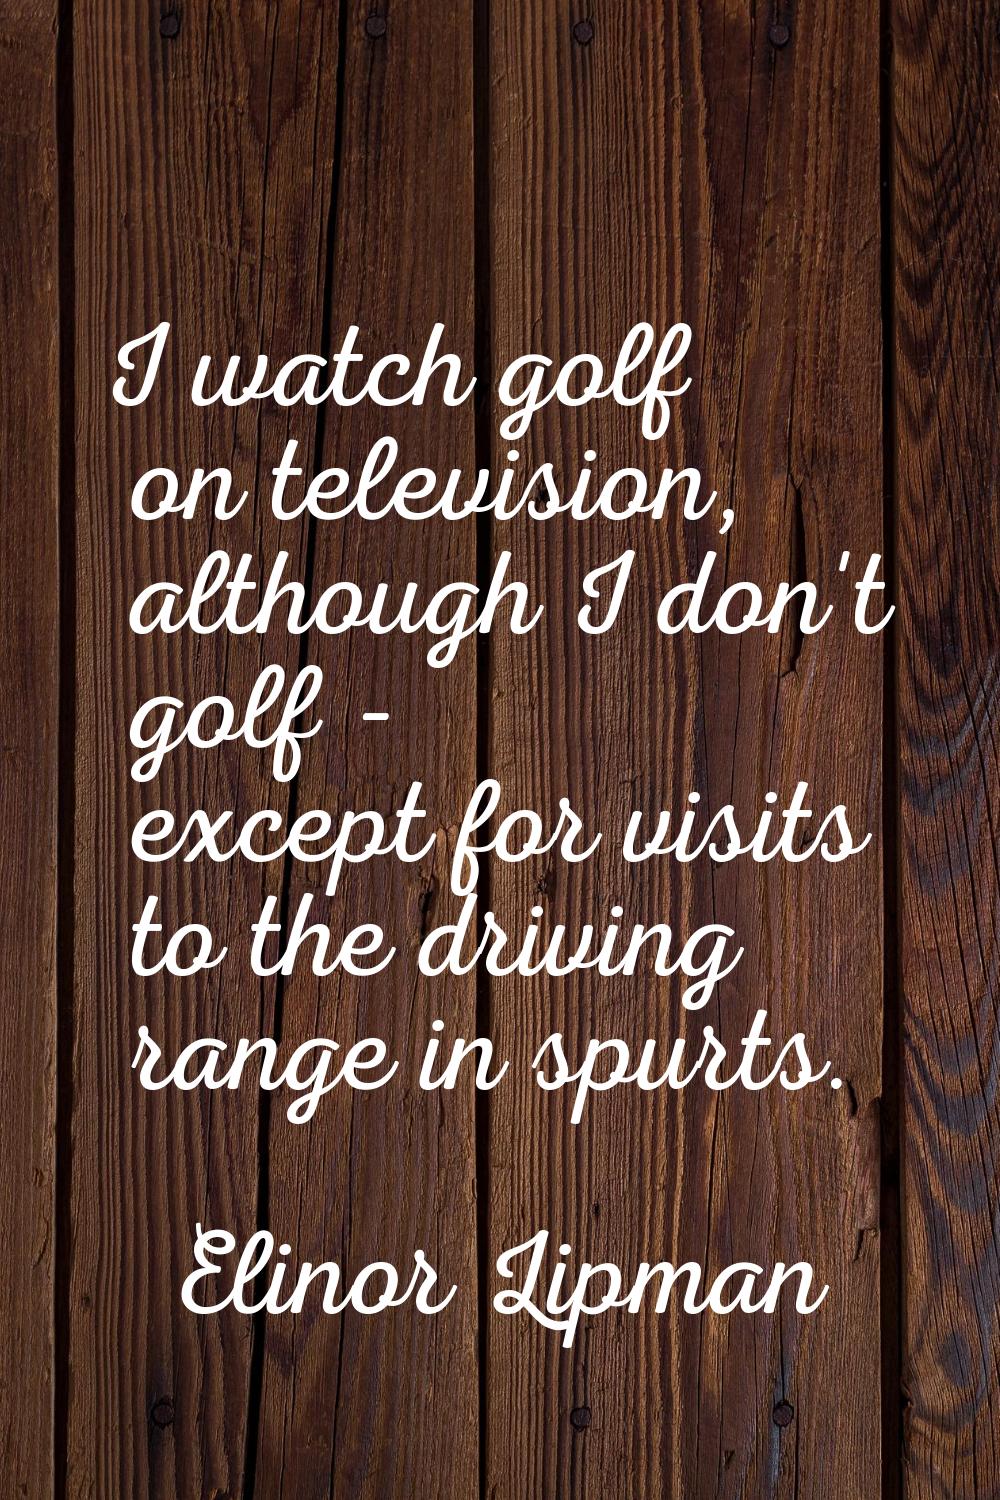 I watch golf on television, although I don't golf - except for visits to the driving range in spurt